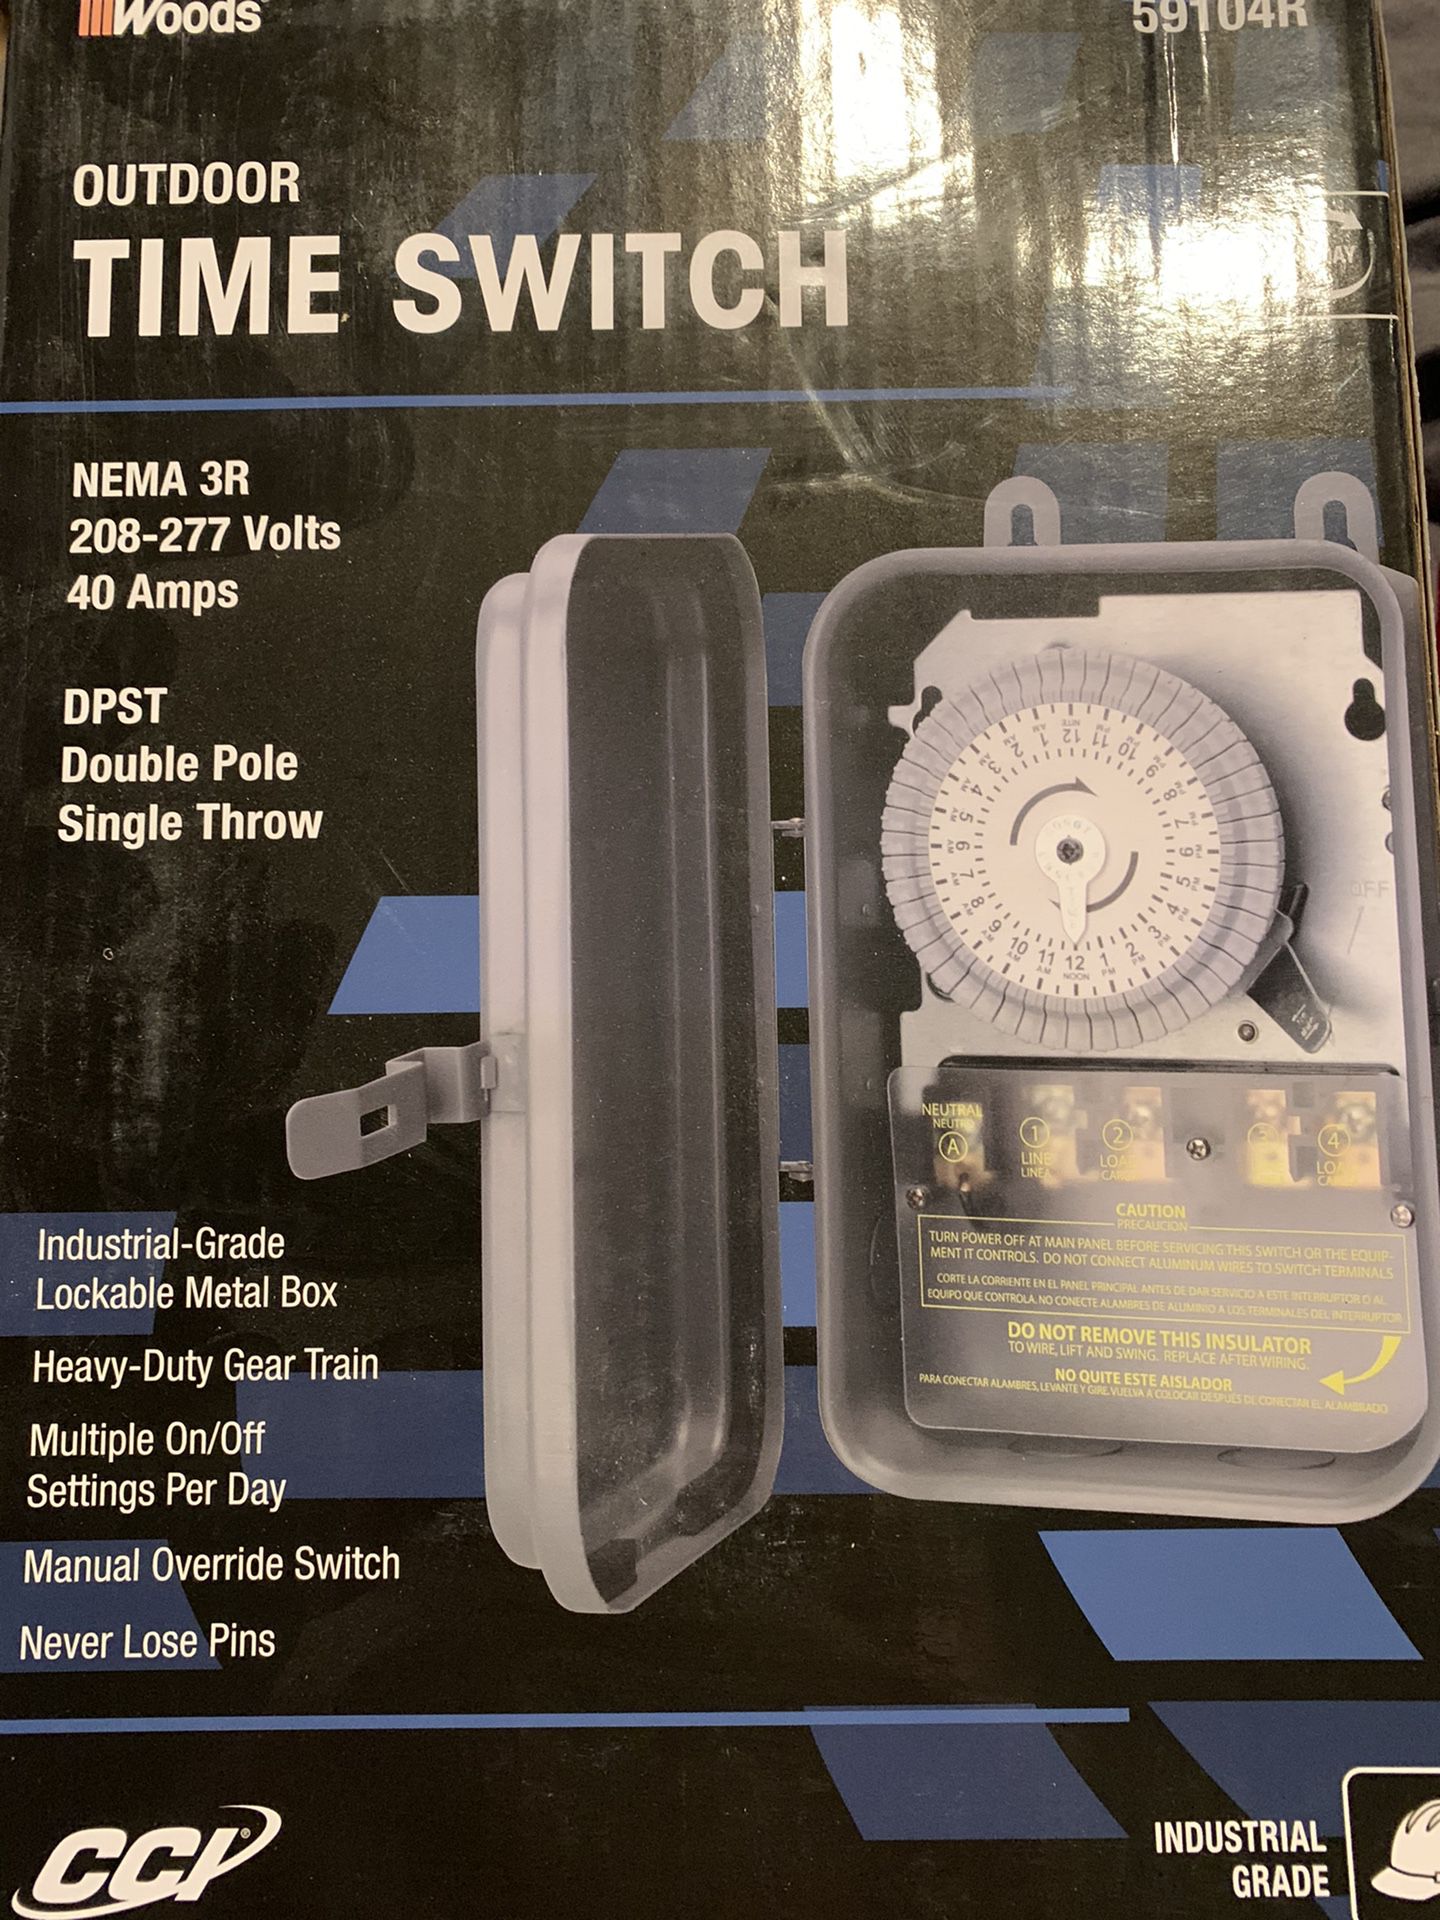 Pool timer switch